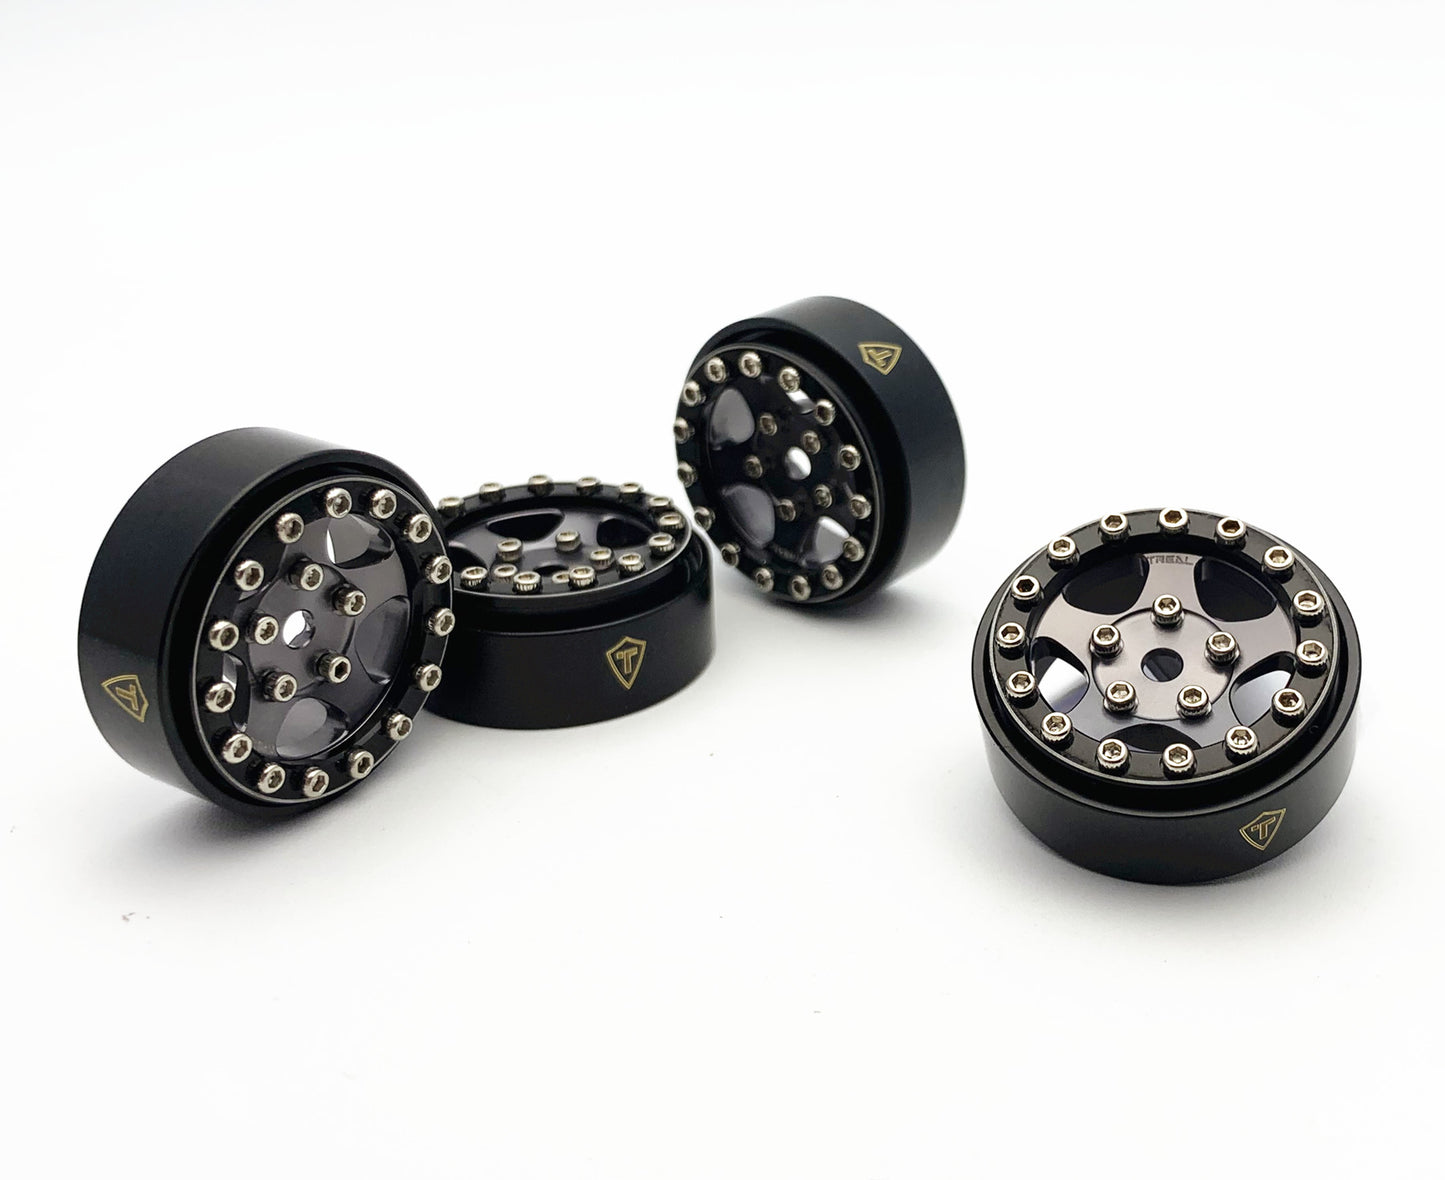 Treal 1.0 Beadlock Wheels(4P-Set) for Axial SCX24 with Brass Rings Weighted 22.4g-B Type